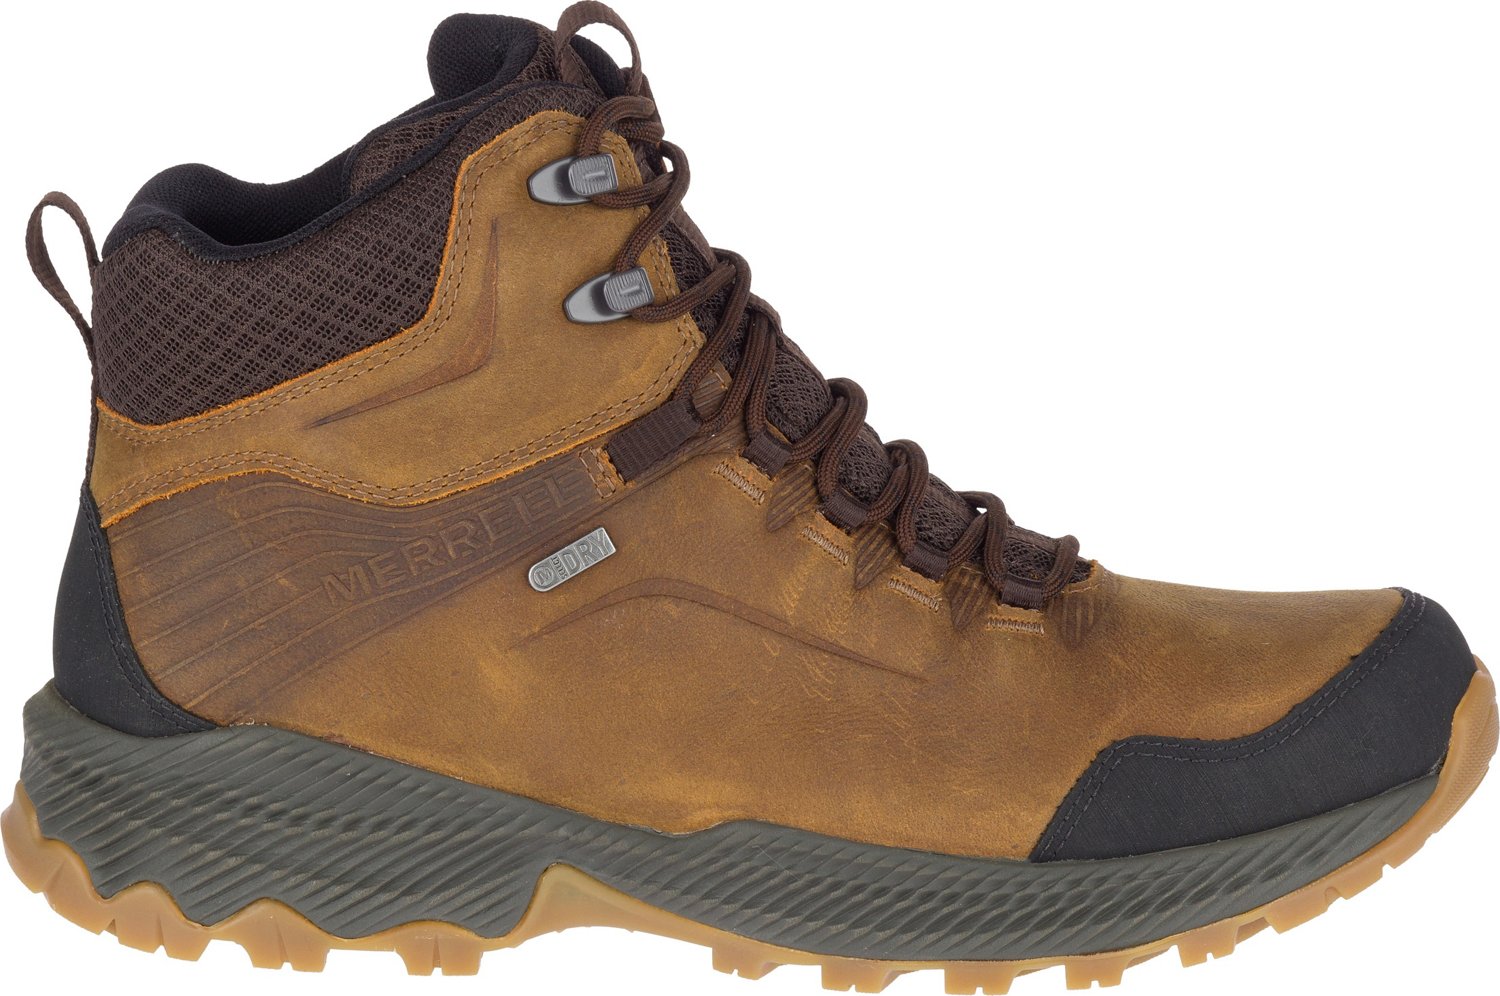 Merrell Men's Forestbound Mid Waterproof Hiking Boots | Academy